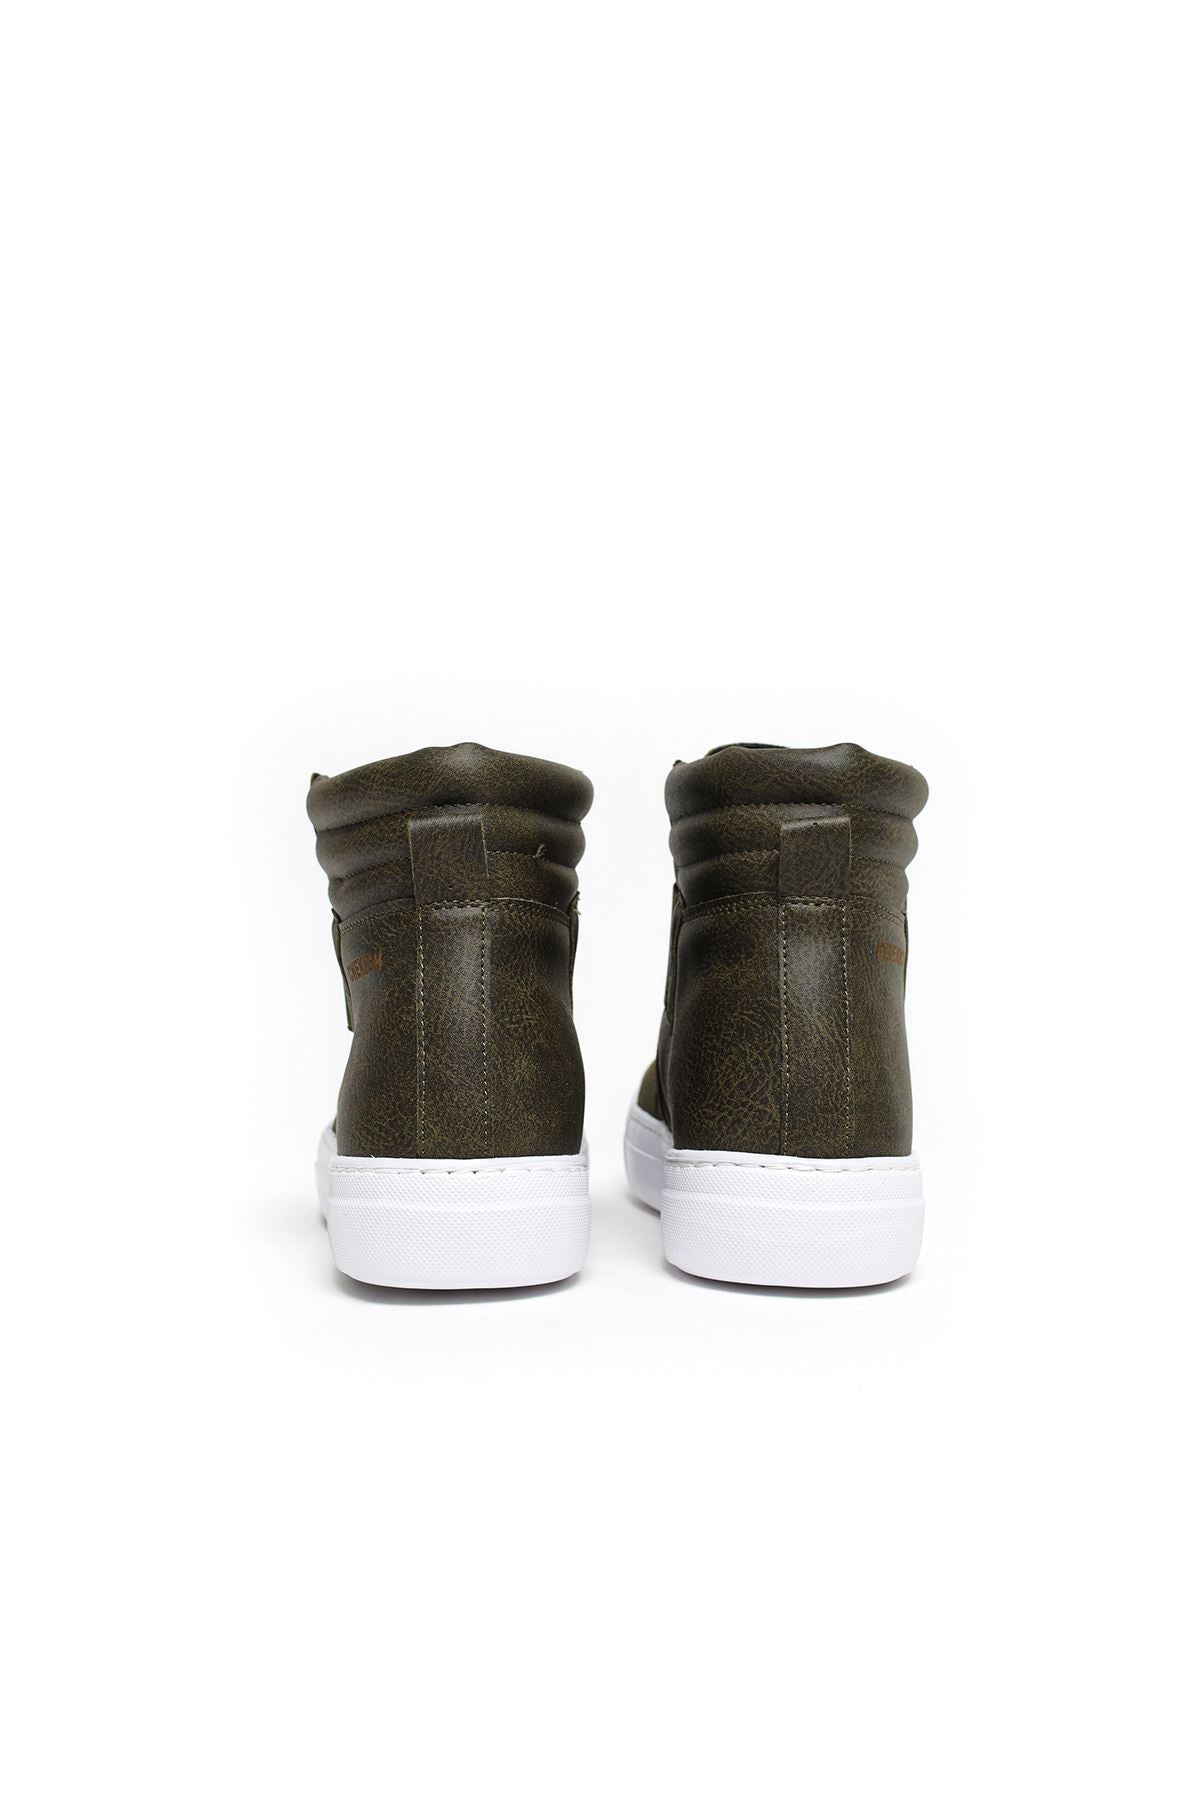 CH023 Men's Banded Khaki-White Sole Casual Sneaker Boots - STREETMODE ™